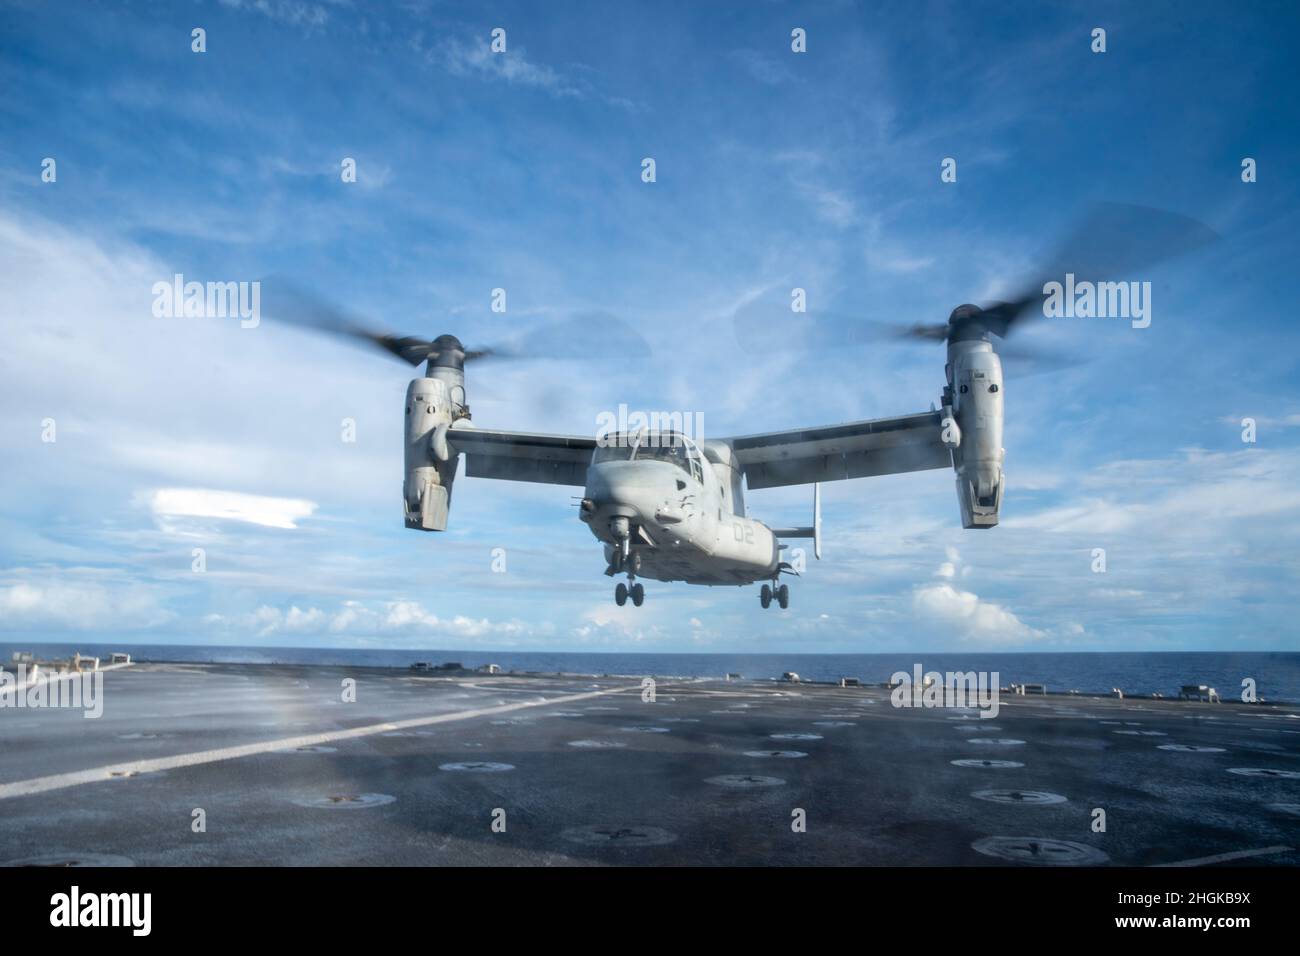 A U.S. Marine Corps MV-22B Osprey assigned to Marine Medium Tiltrotor Squadron (VMM) 165 (Rein.), 11th Marine Expeditionary Unit, takes off from the flight deck of amphibious dock landing ship USS Pearl Harbor (LSD 52), Aug. 31, 2021. Pearl Harbor, part of the USS Essex Amphibious Ready Group, along with the 11th MEU, is operating in the U.S. 7th Fleet area of responsibility to enhance interoperability with allies and partners and serve as a ready response force to defend peace and stability in the Indo-Pacific region. Stock Photo